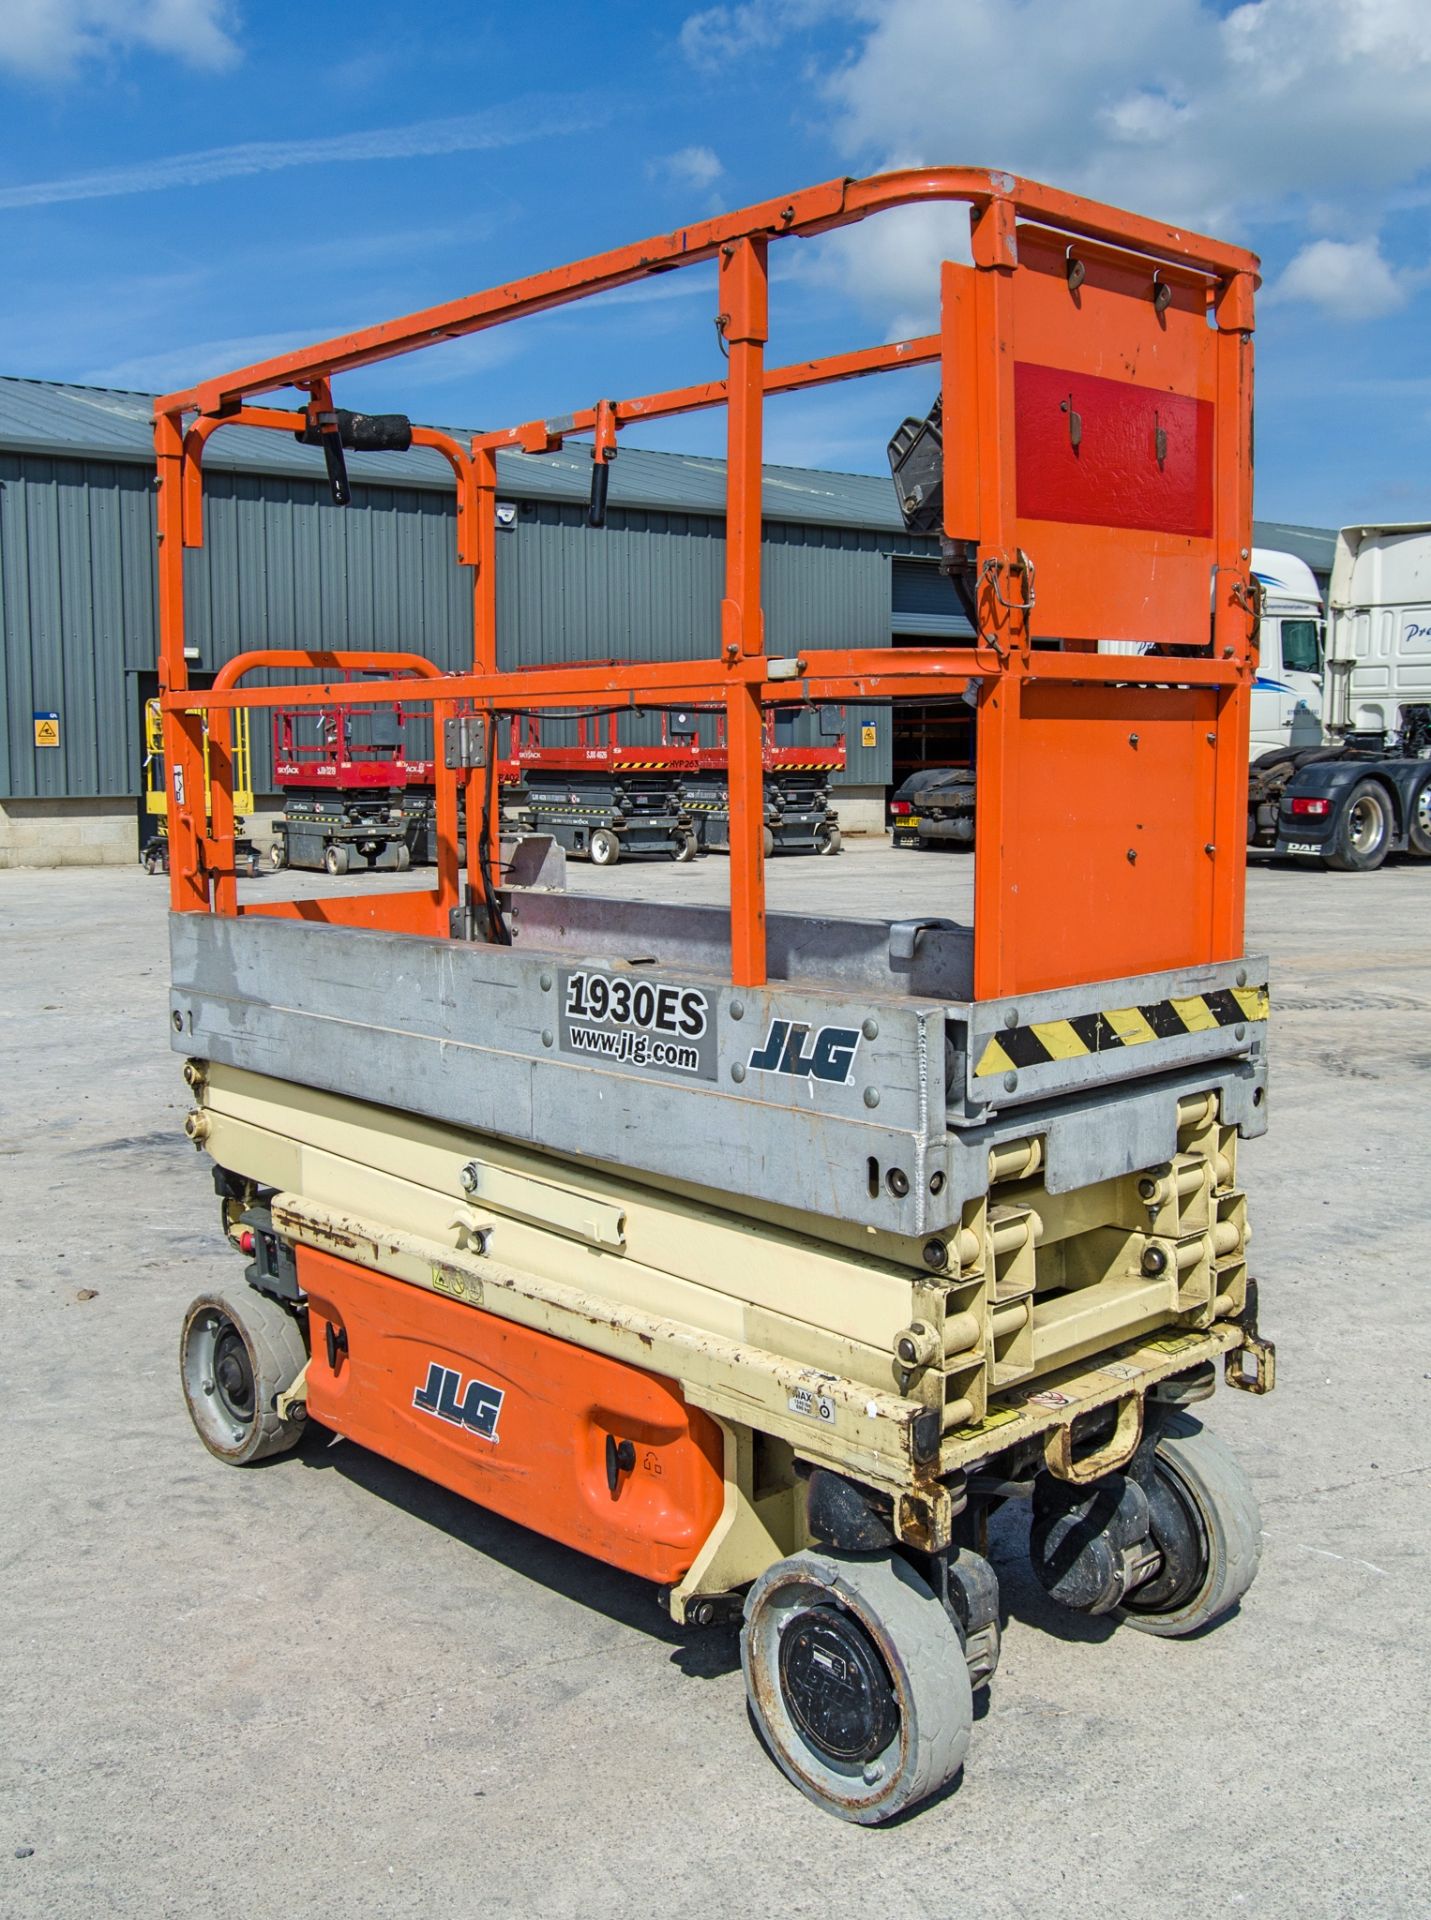 JLG 1930ES battery electric scissor lift access platform Year: 2012 S/N: 8490 Recorded Hours: 275 - Image 2 of 9